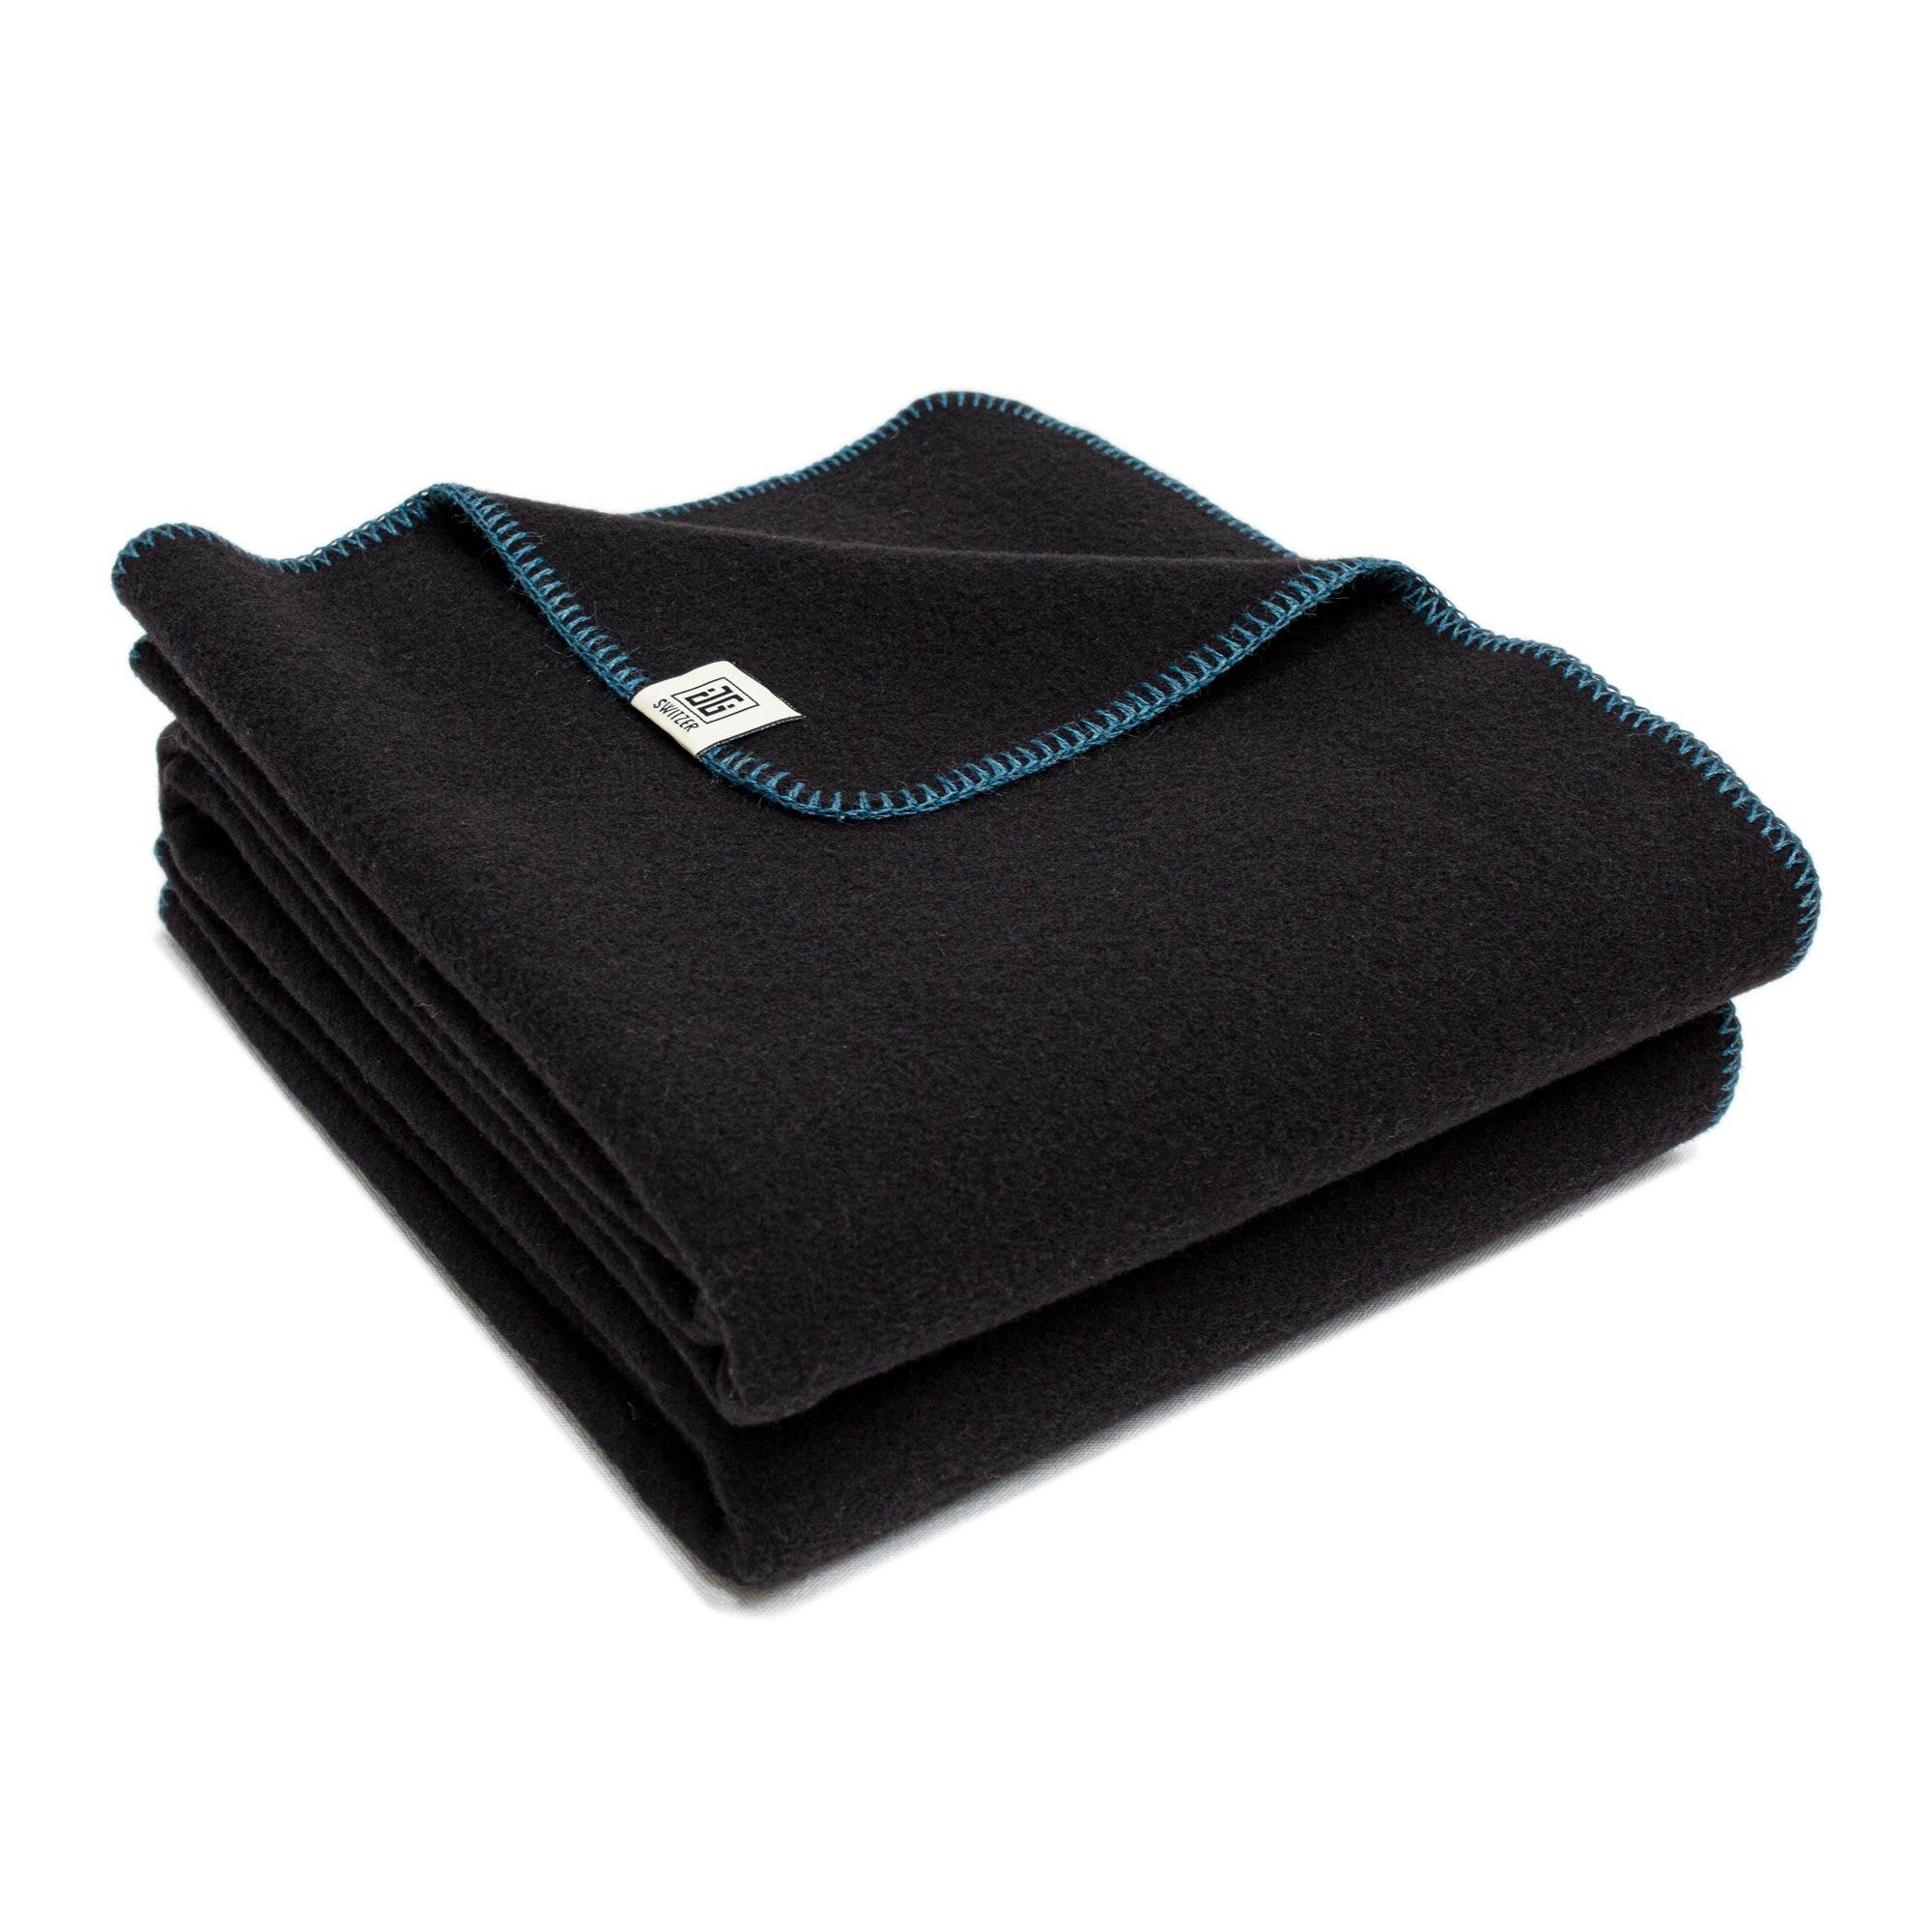 The Portia is our warmest, hardiest 100% Merino throw, milled in England from soft and high quality raven black Merino wool. Black wool is finished with fine hand sewn detailing blanket stitch of Alpaca and Silk yarn. Available in Blanket stitch of